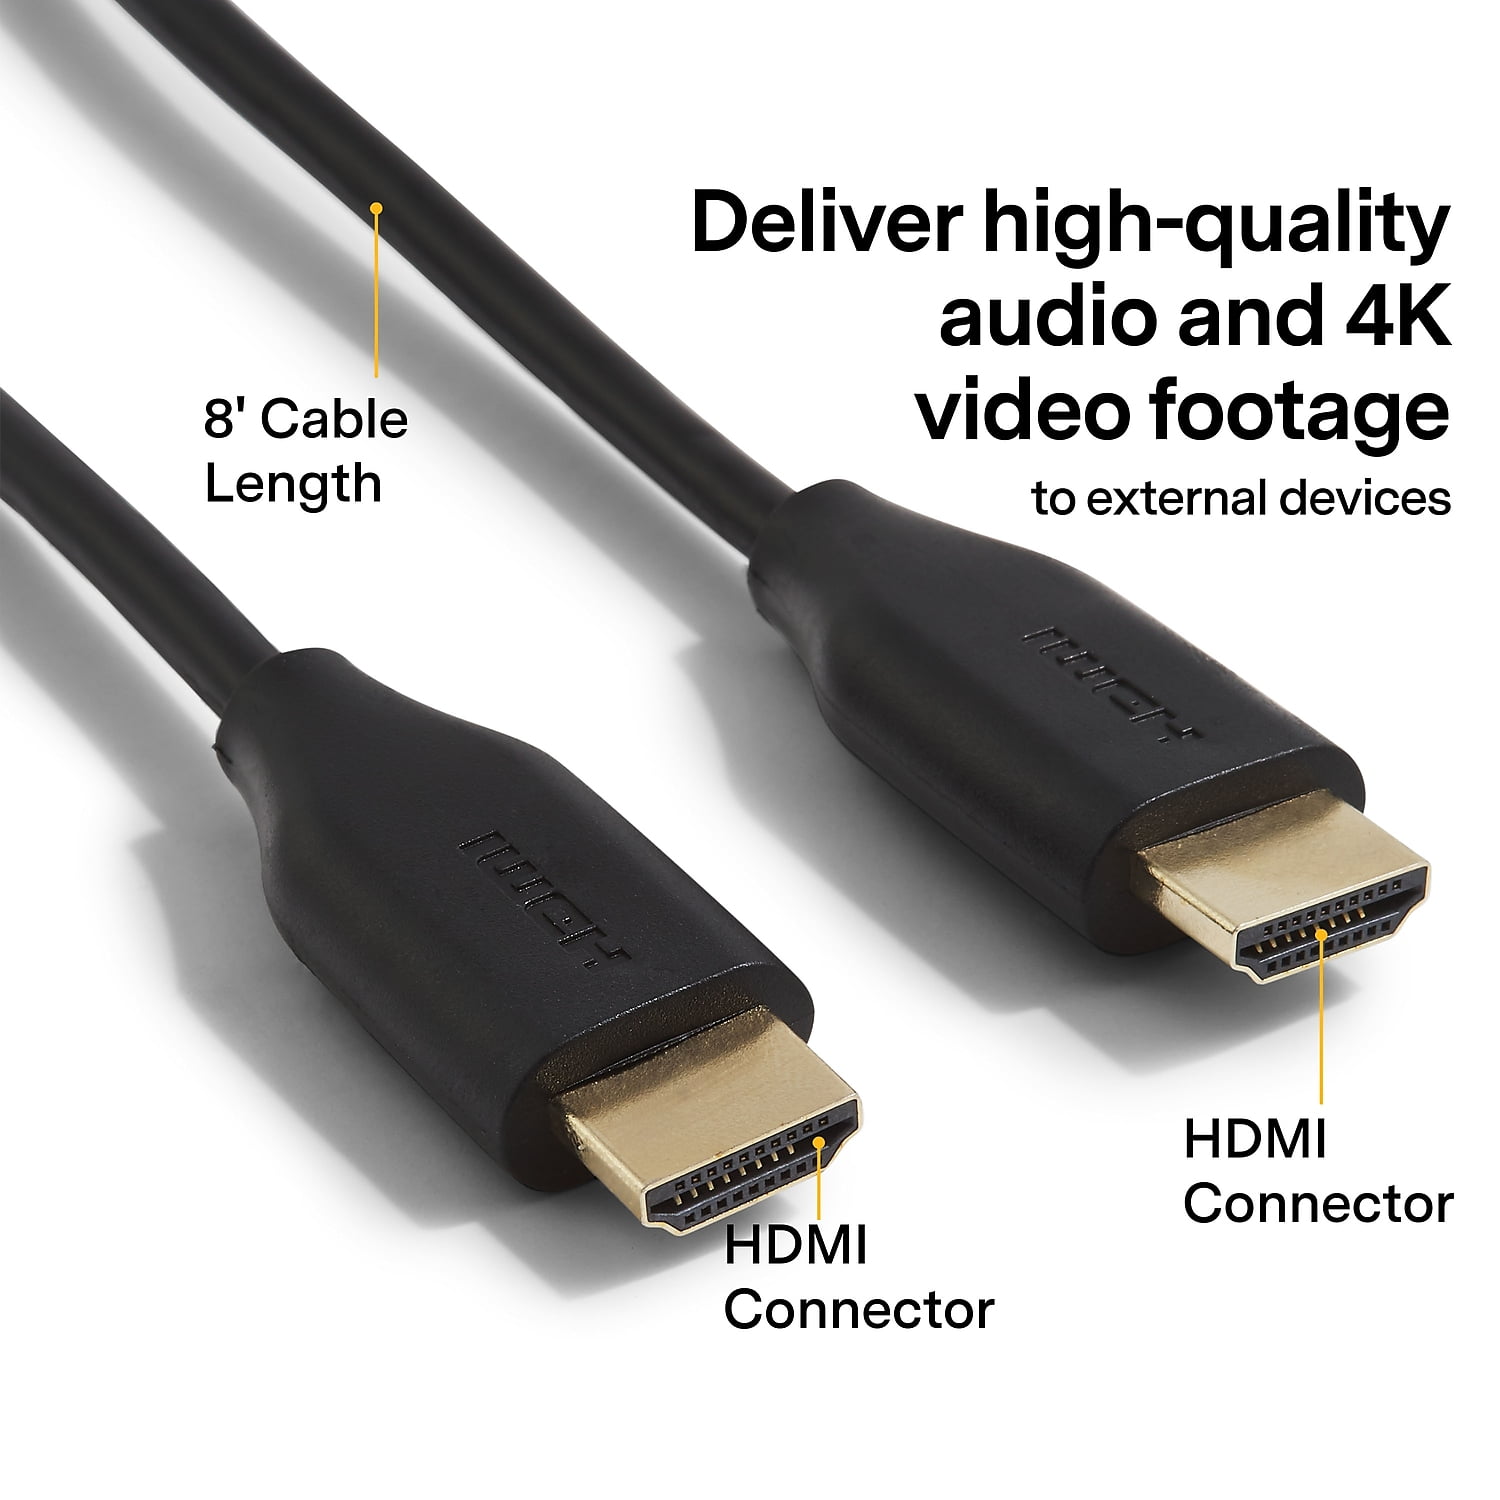 XIBUZZ 4K HDMI Cable 50 feet, High-Speed 4k HDMI Cable TV Cable, HDMI Cable  50 Foot for 4K@60HZ,1080p UHD, FullHD, CL3 Rated, ARC, PS4, TV HDMI Cable,  50 ft HDMI Cable (50